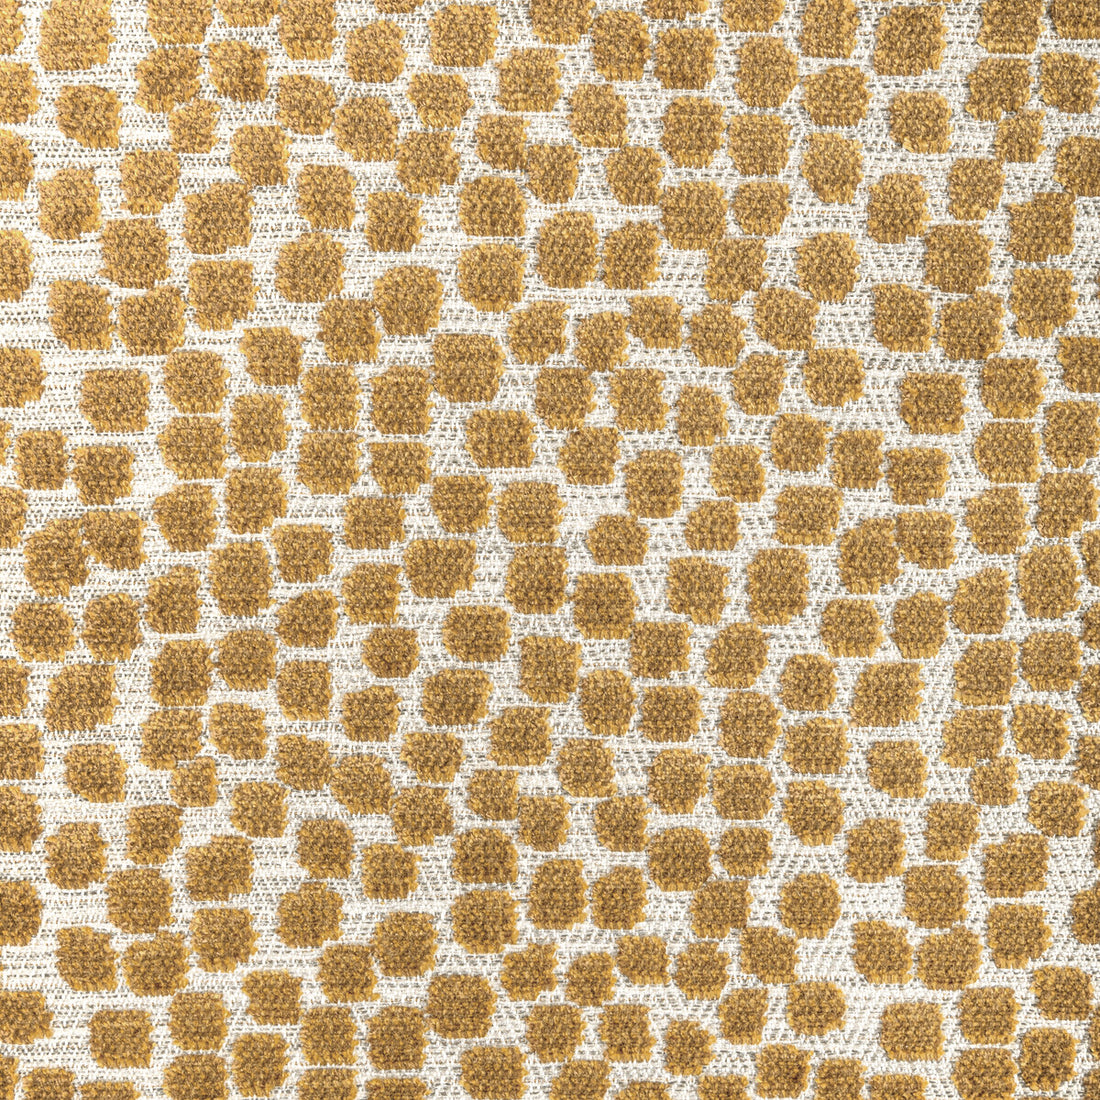 Flurries fabric in saddle color - pattern 34849.4.0 - by Kravet Design in the Thom Filicia collection